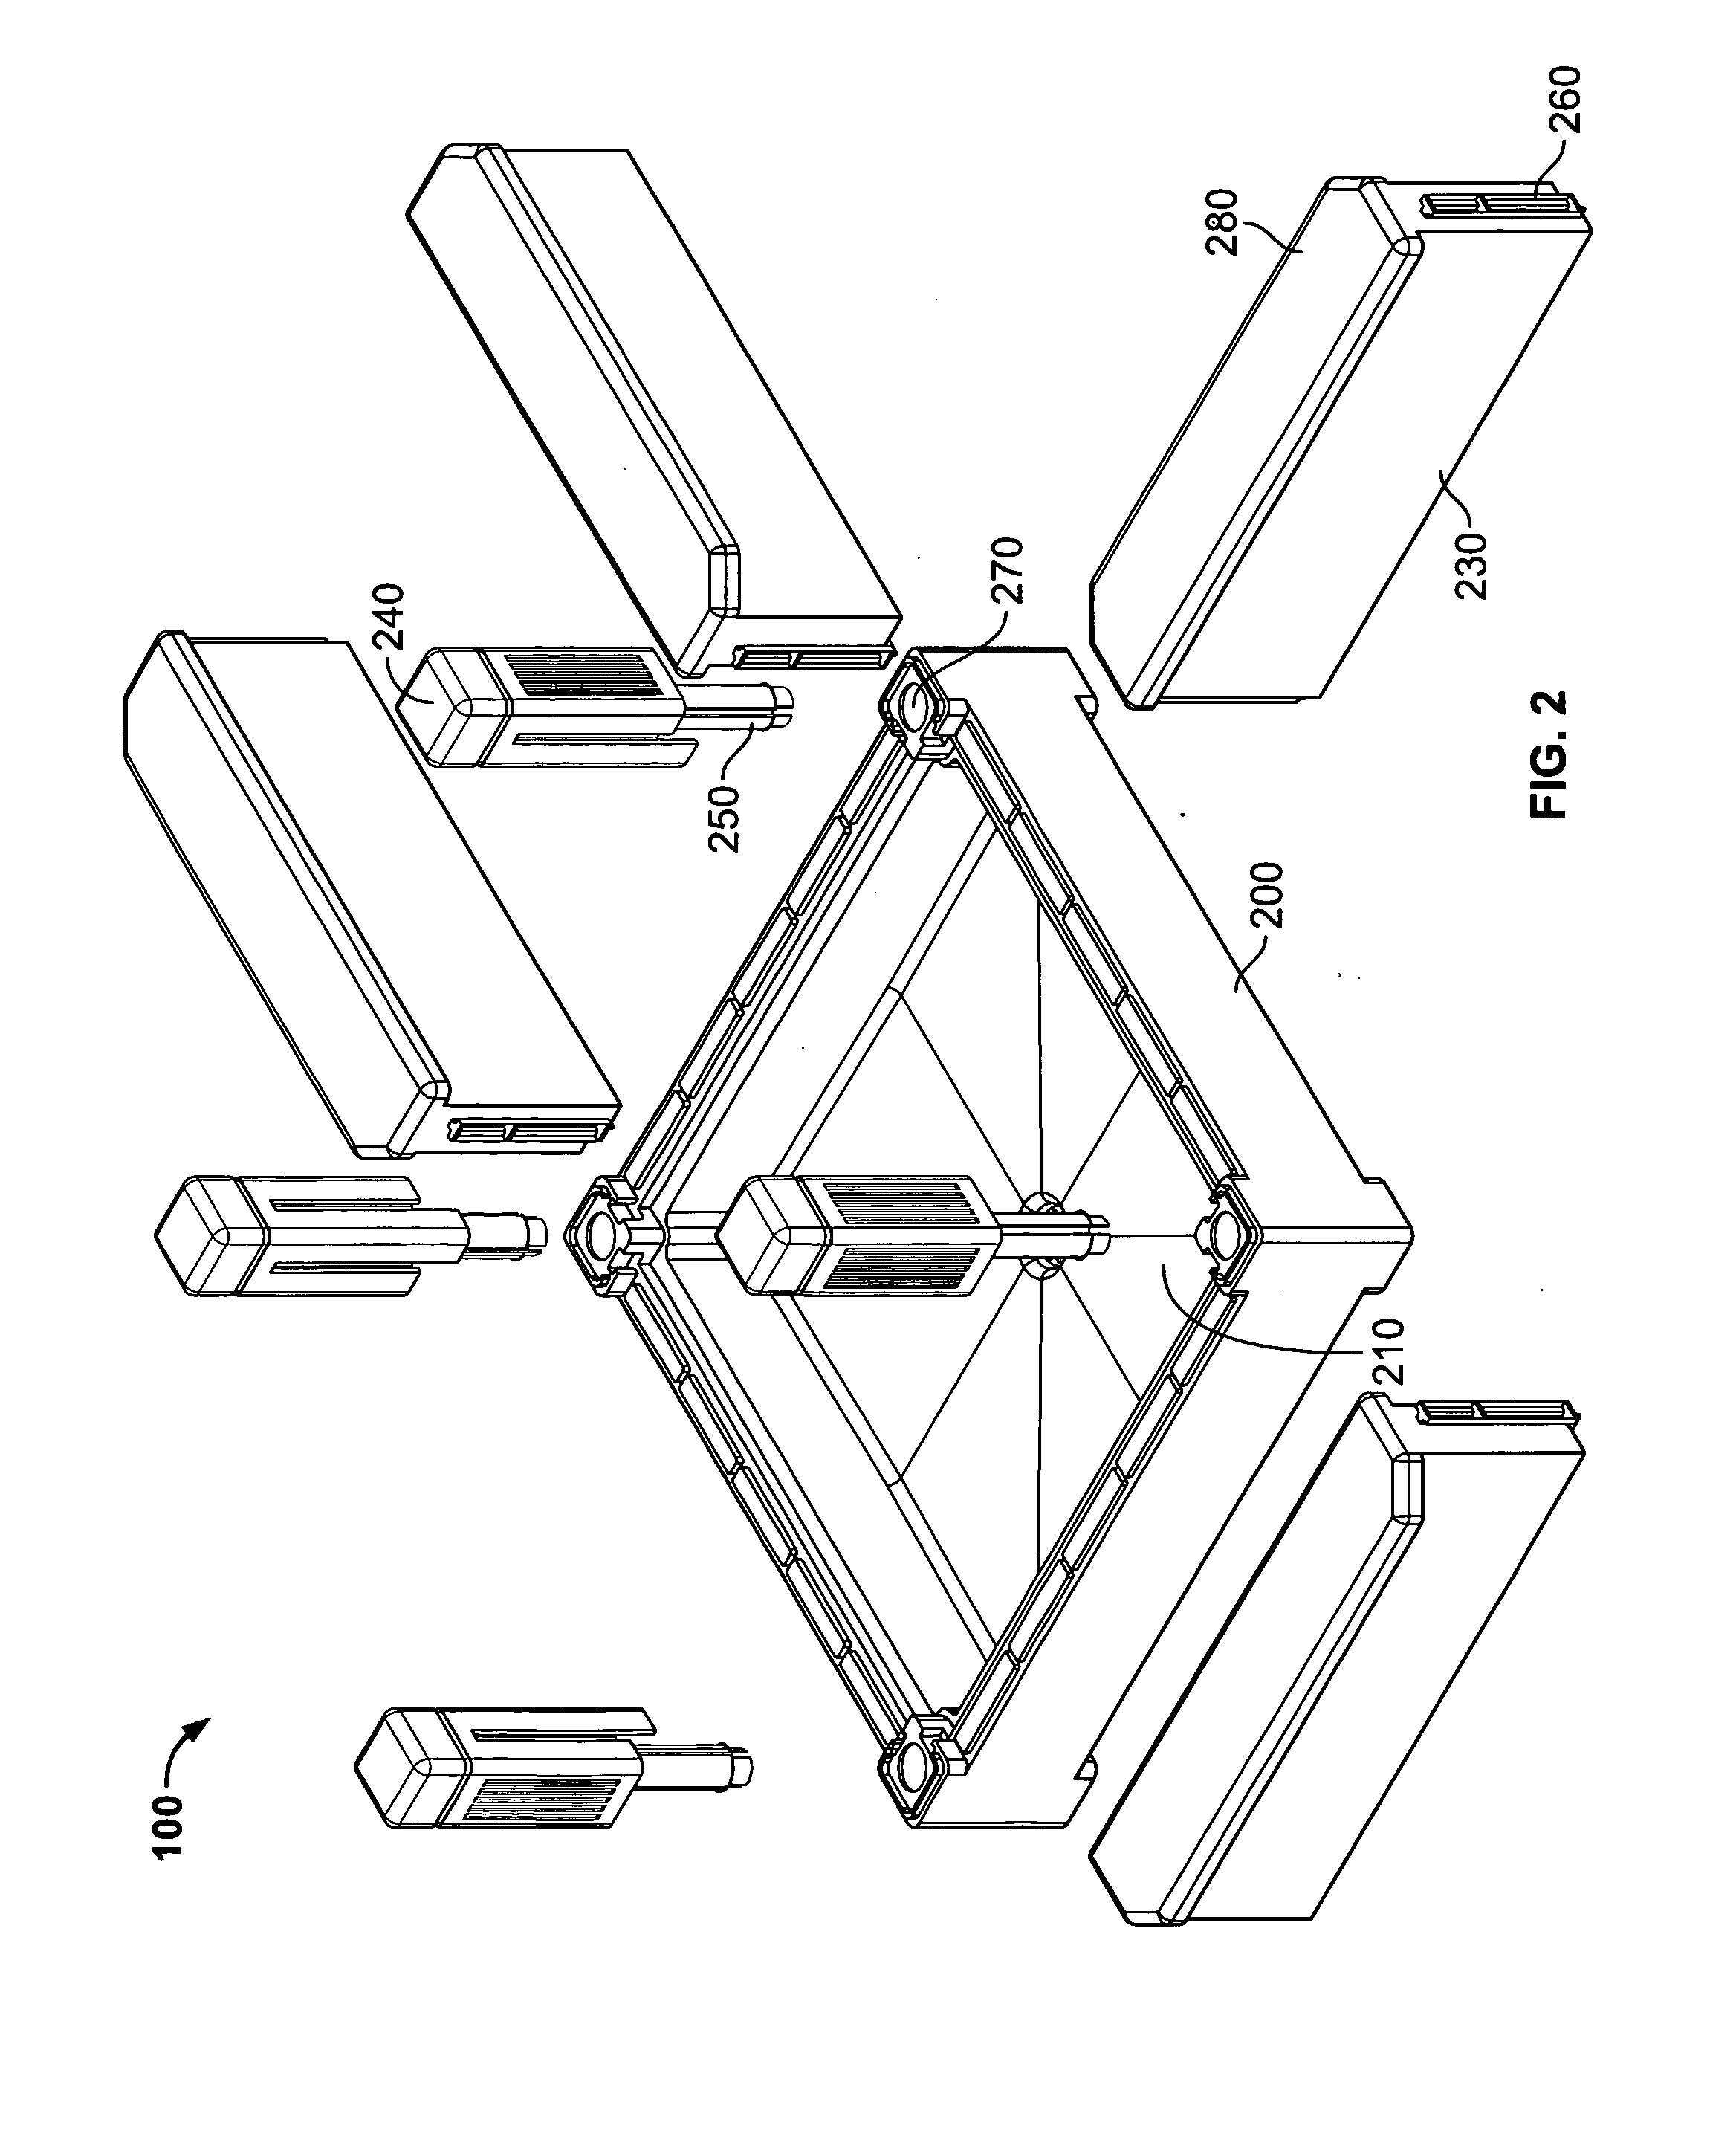 Modular roof, deck and patio apparatus, including modular panels with snap connection features